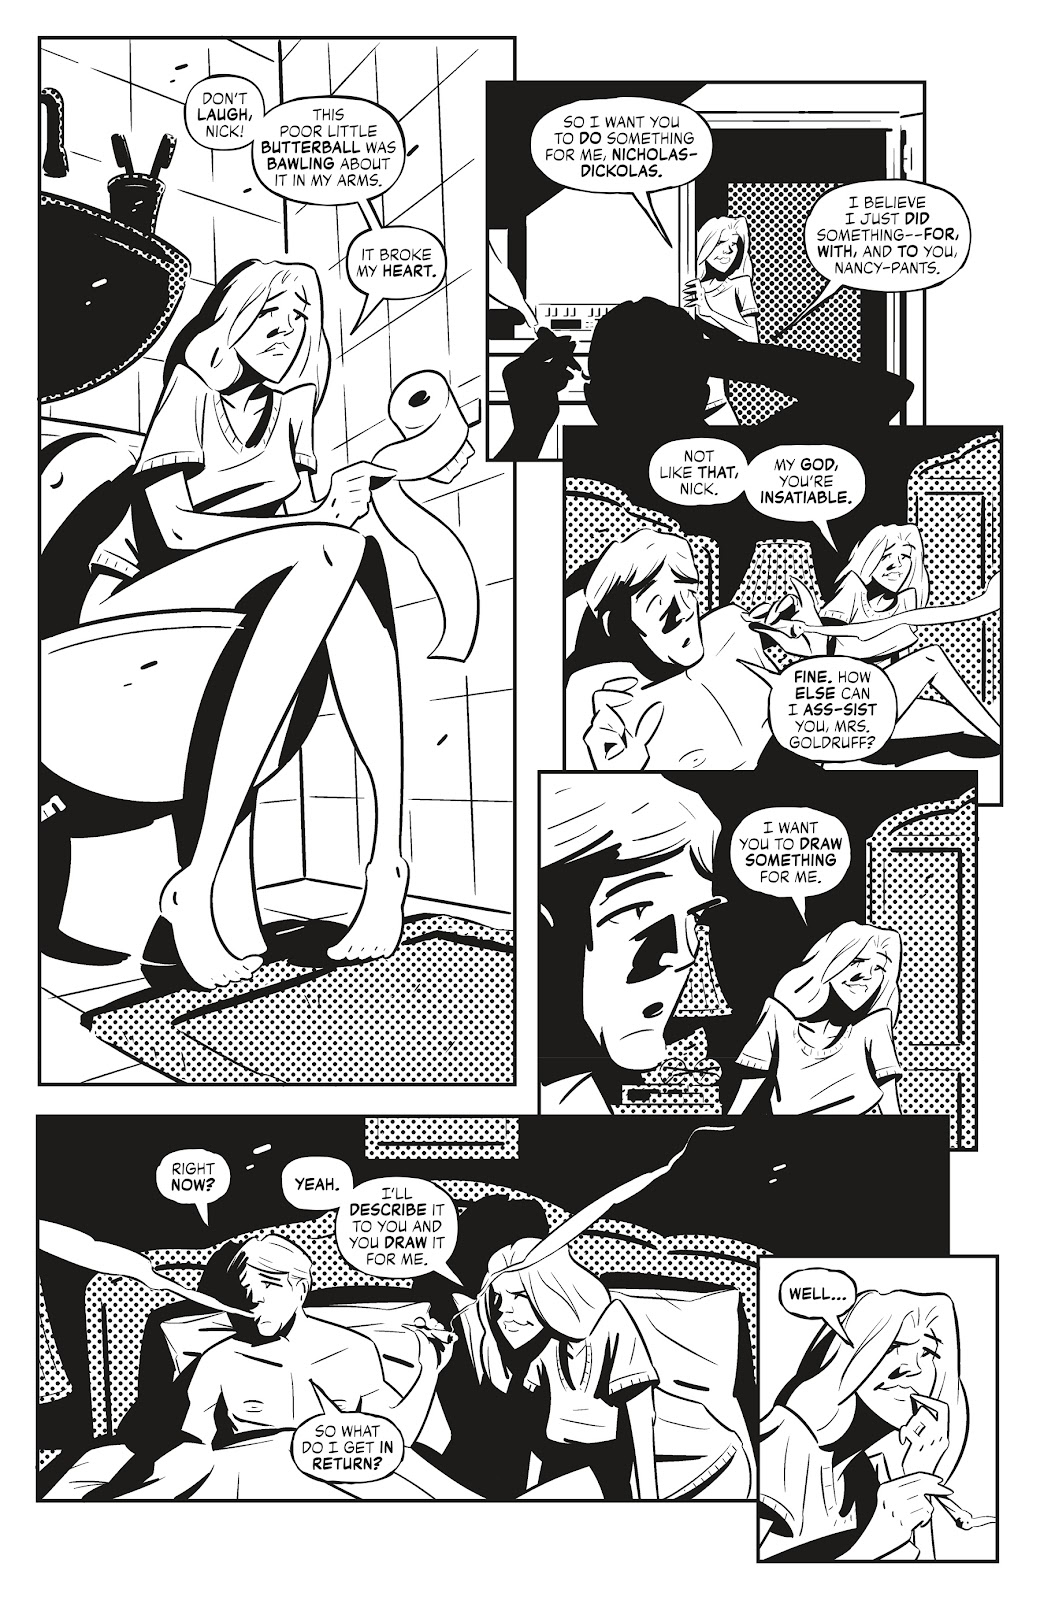 Quick Stops Vol. 2 issue 1 - Page 8